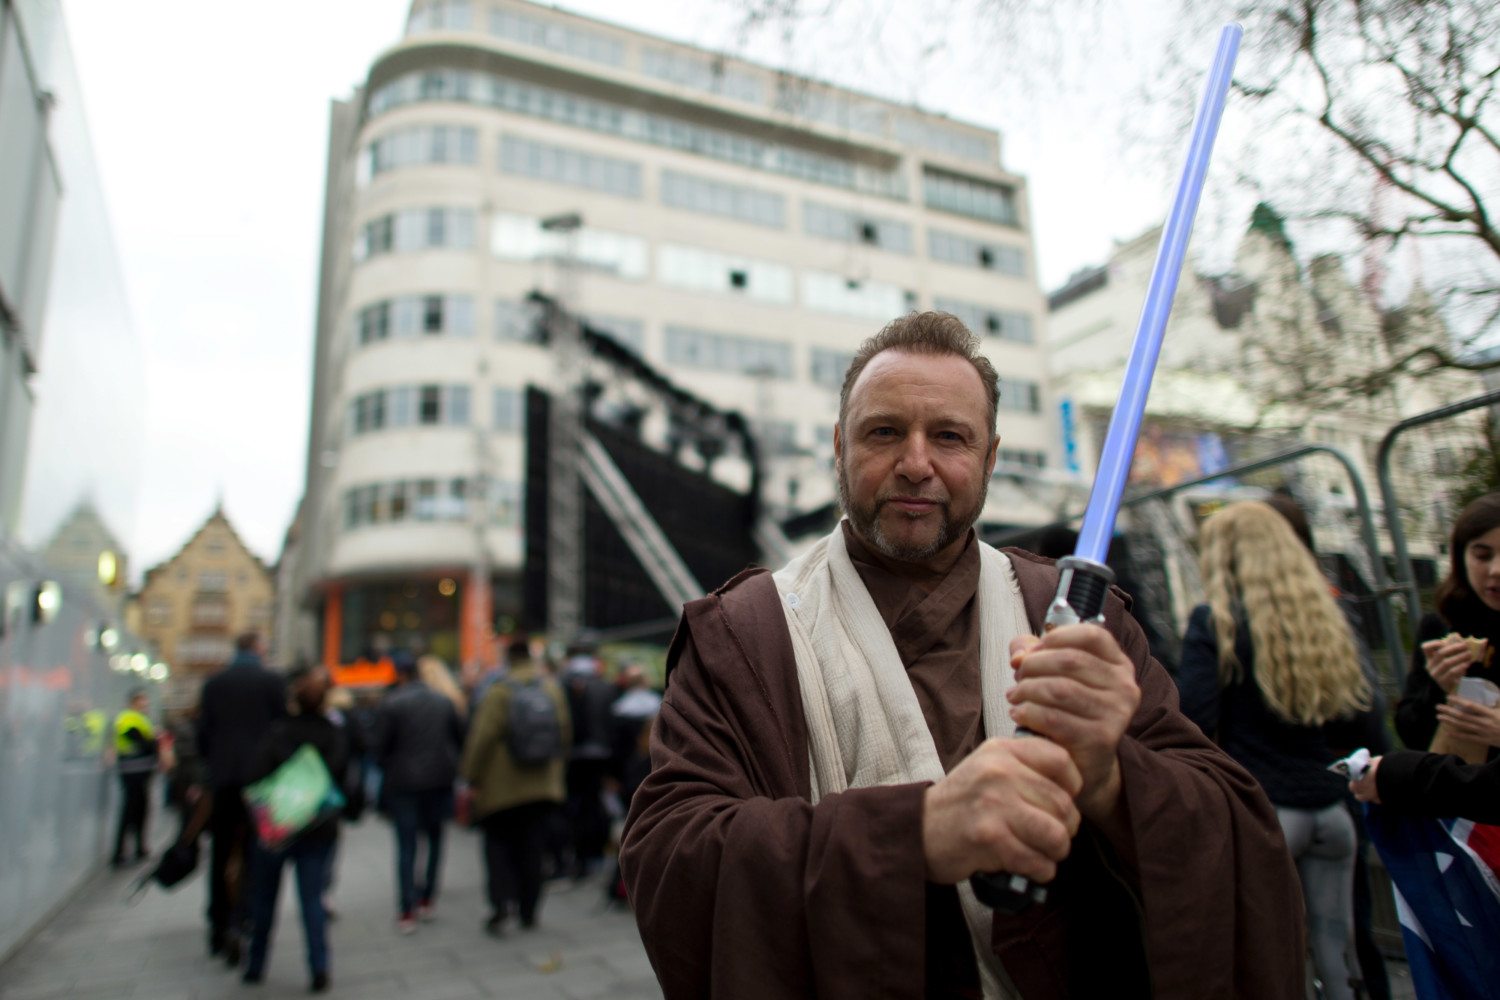 Build-up Begins For The European Premiere Of Star Wars: The Force Awakens